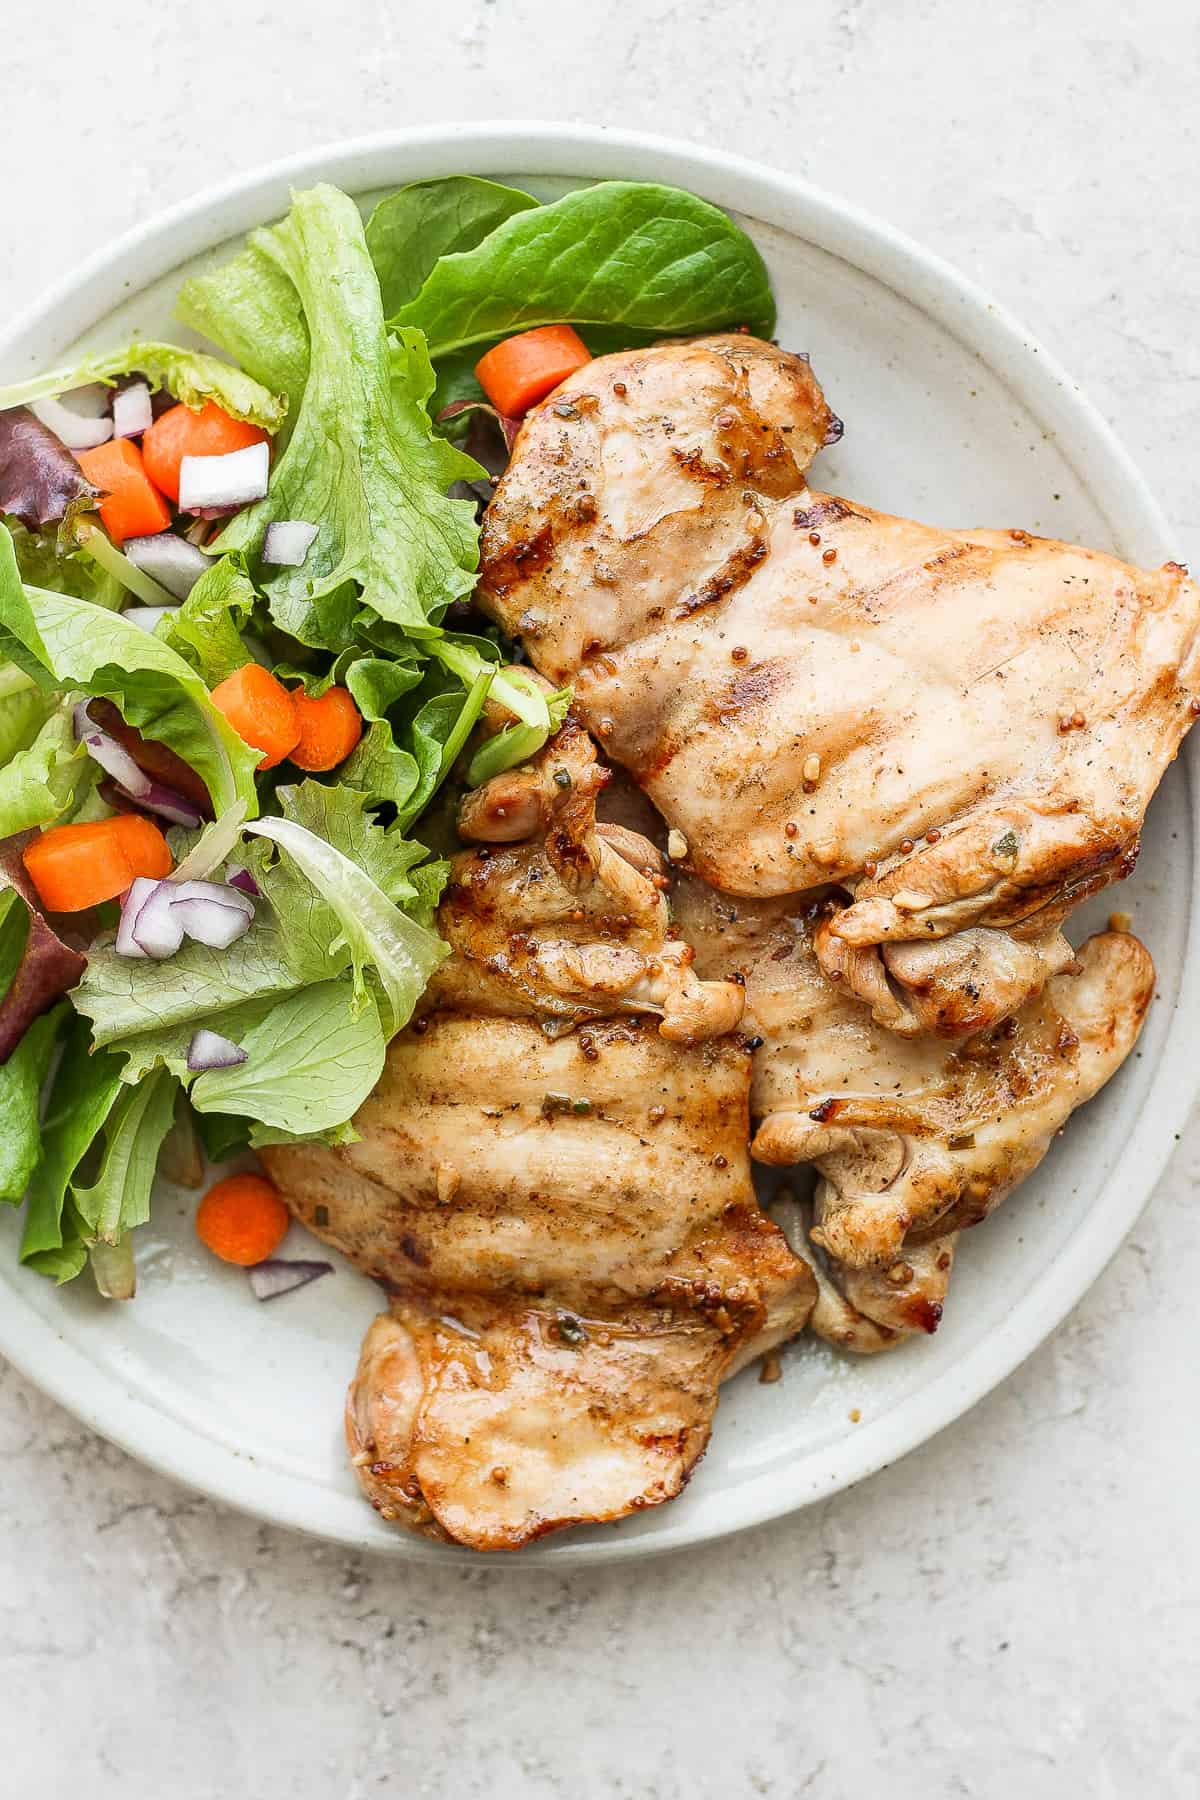 Chicken thighs on a plate with a salad.